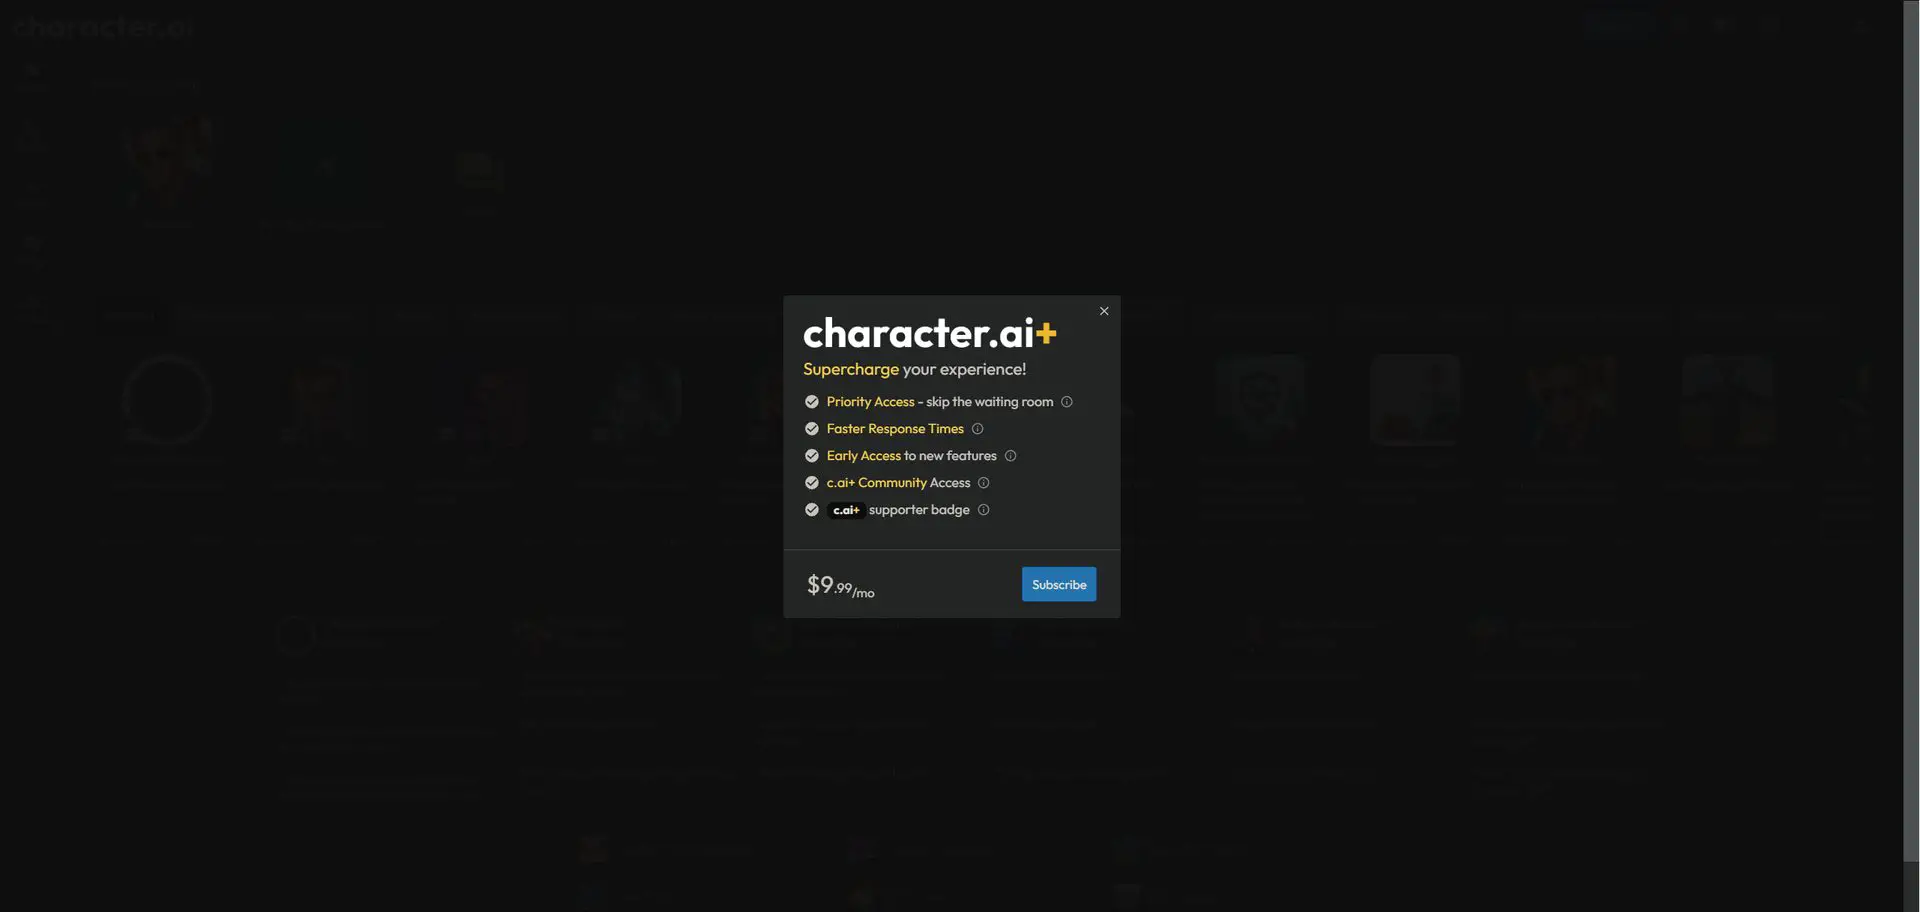 What is Character.ai? Learn its new paid tier Character AI Plus and Character AI voices. Keep reading and explore how to download Character AI!